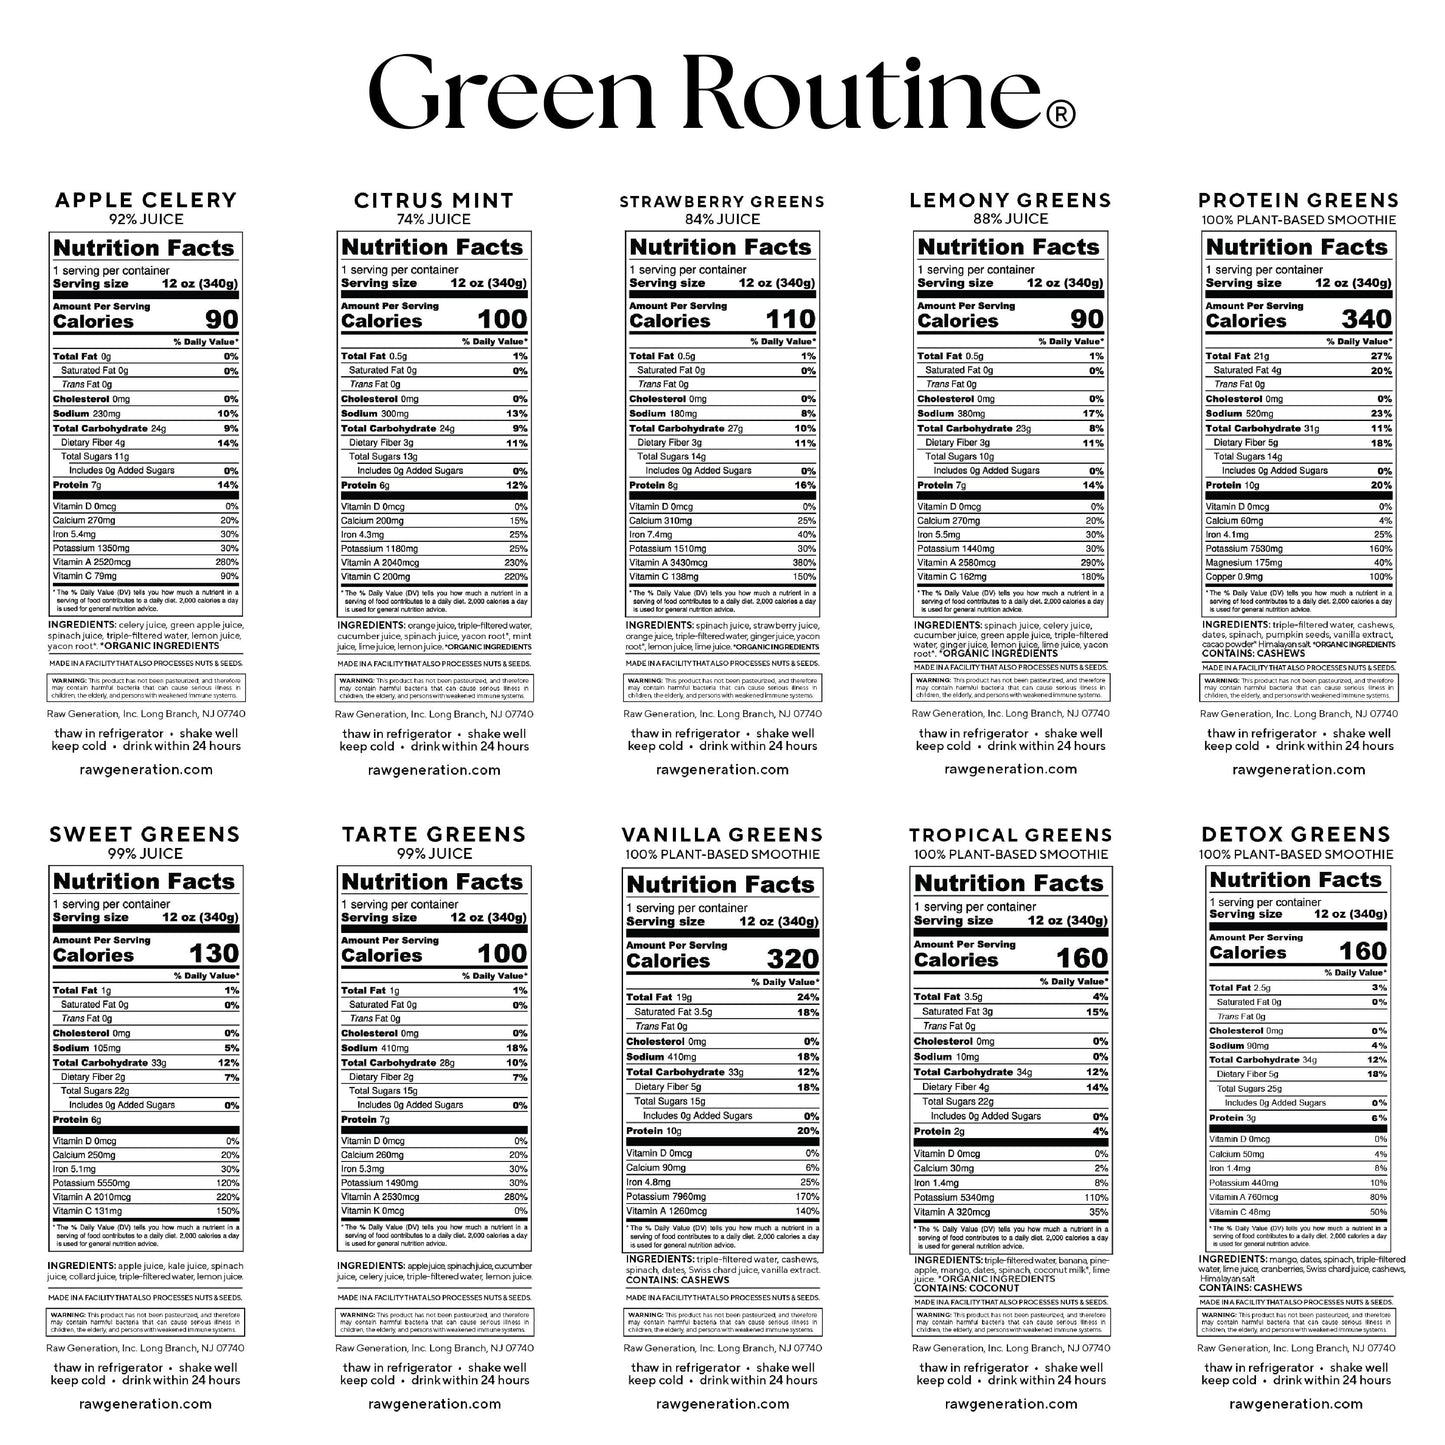 Green Routine nutrition facts.